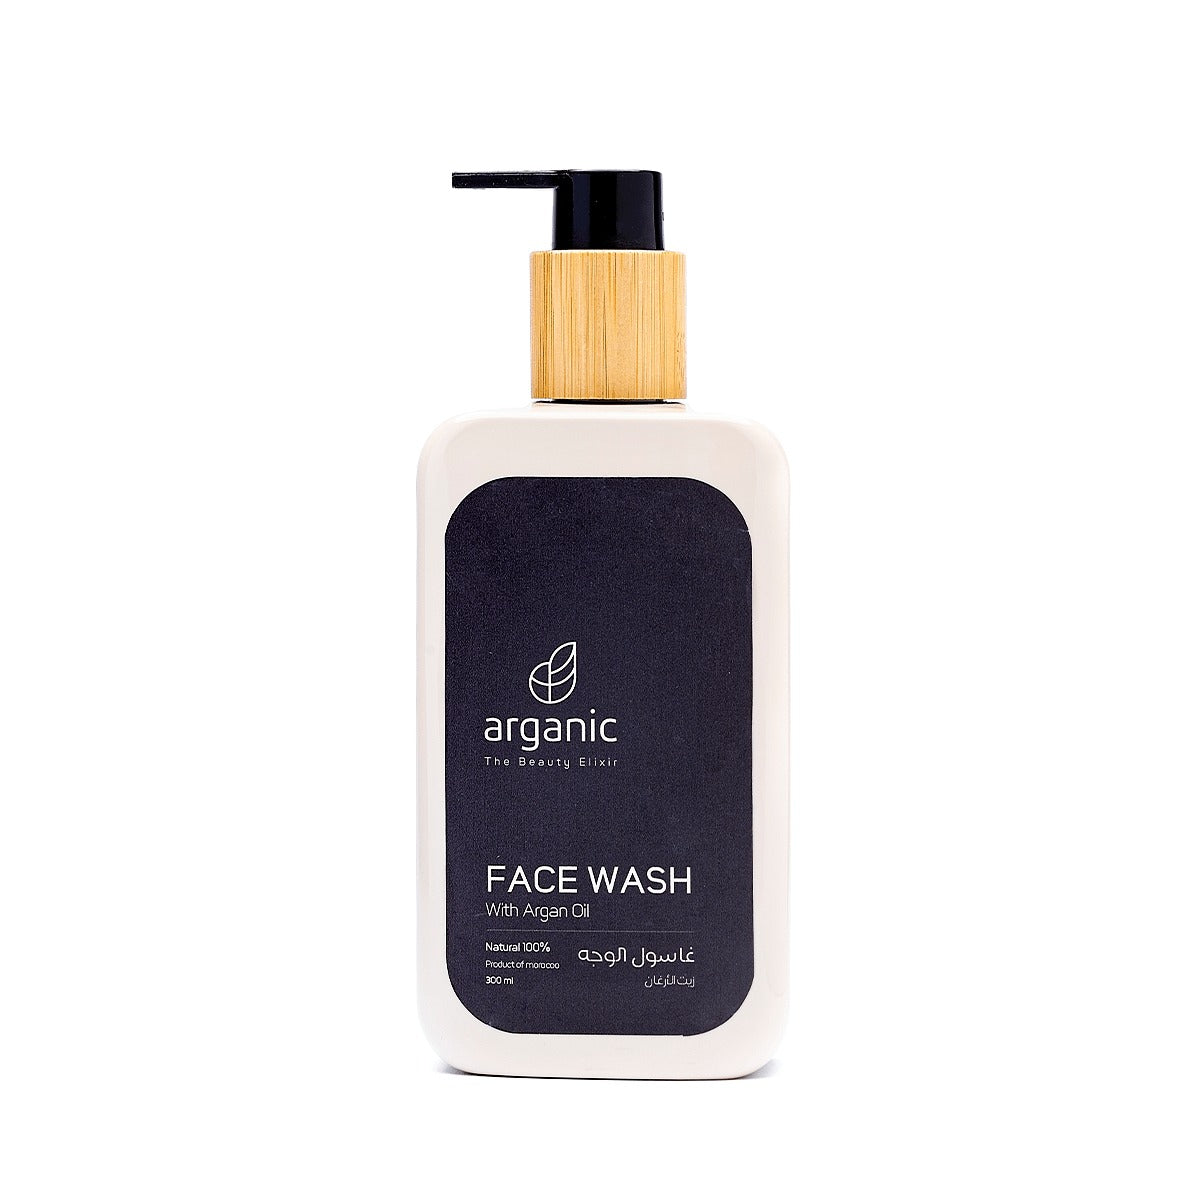 Elegant face wash bottle with dark label and wood cap.